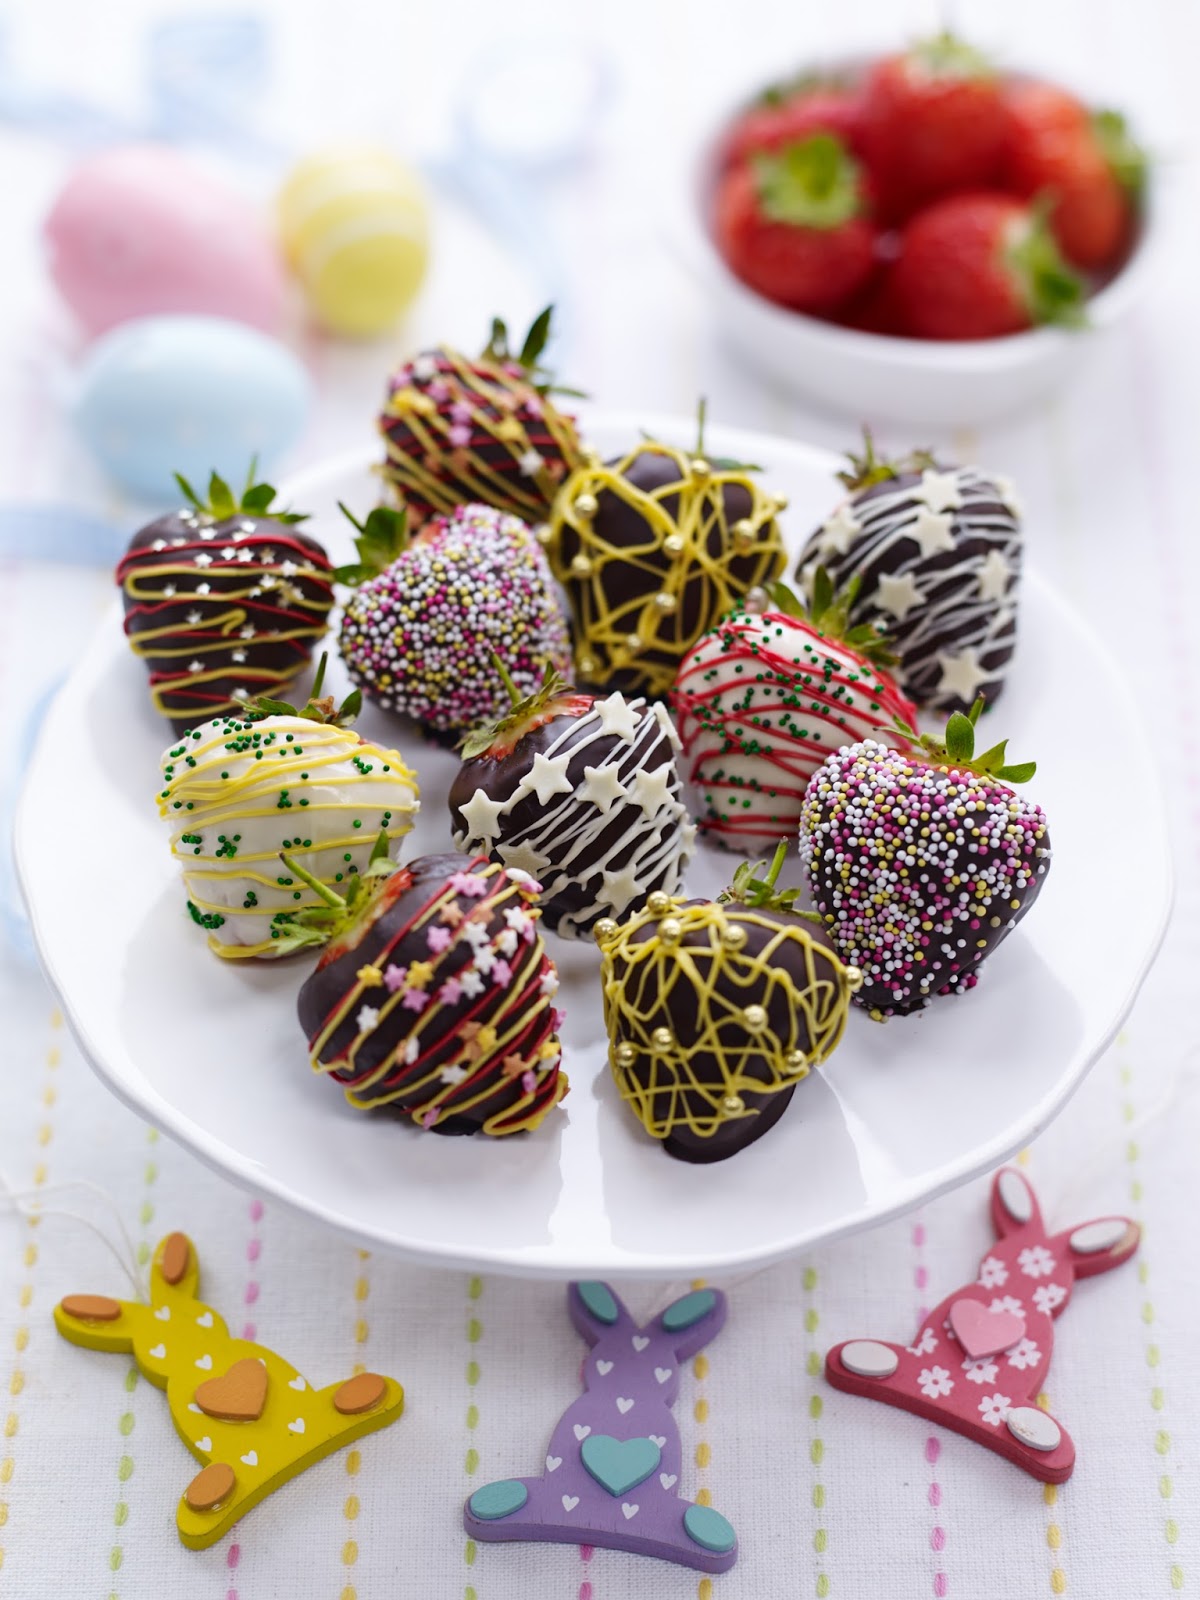 Chocolate Dipped Strawberries: How To Make